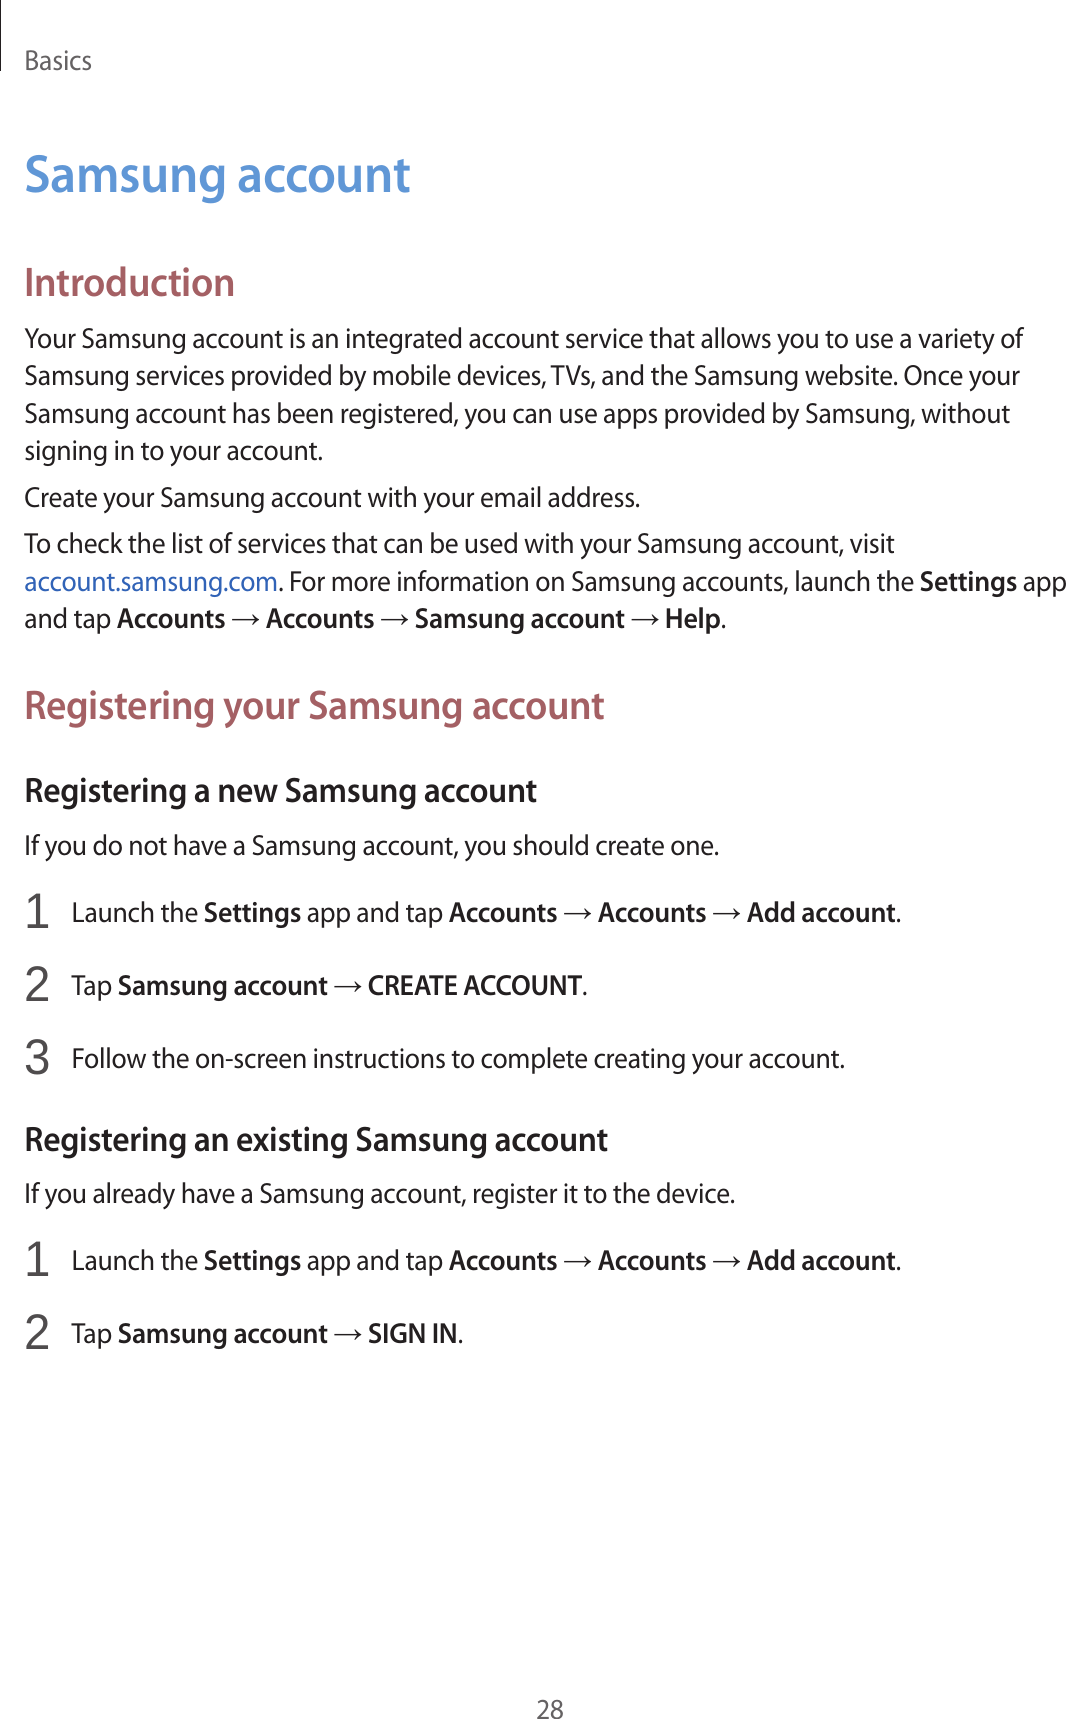 Basics28Samsung accountIntroductionYour Samsung account is an integrated account service that allows you to use a variety of Samsung services provided by mobile devices, TVs, and the Samsung website. Once your Samsung account has been registered, you can use apps provided by Samsung, without signing in to your account.Create your Samsung account with your email address.To check the list of services that can be used with your Samsung account, visit account.samsung.com. For more information on Samsung accounts, launch the Settings app and tap Accounts → Accounts → Samsung account → Help.Registering your Samsung accountRegistering a new Samsung accountIf you do not have a Samsung account, you should create one.1  Launch the Settings app and tap Accounts → Accounts → Add account.2  Tap Samsung account → CREATE ACCOUNT.3  Follow the on-screen instructions to complete creating your account.Registering an existing Samsung accountIf you already have a Samsung account, register it to the device.1  Launch the Settings app and tap Accounts → Accounts → Add account.2  Tap Samsung account → SIGN IN.